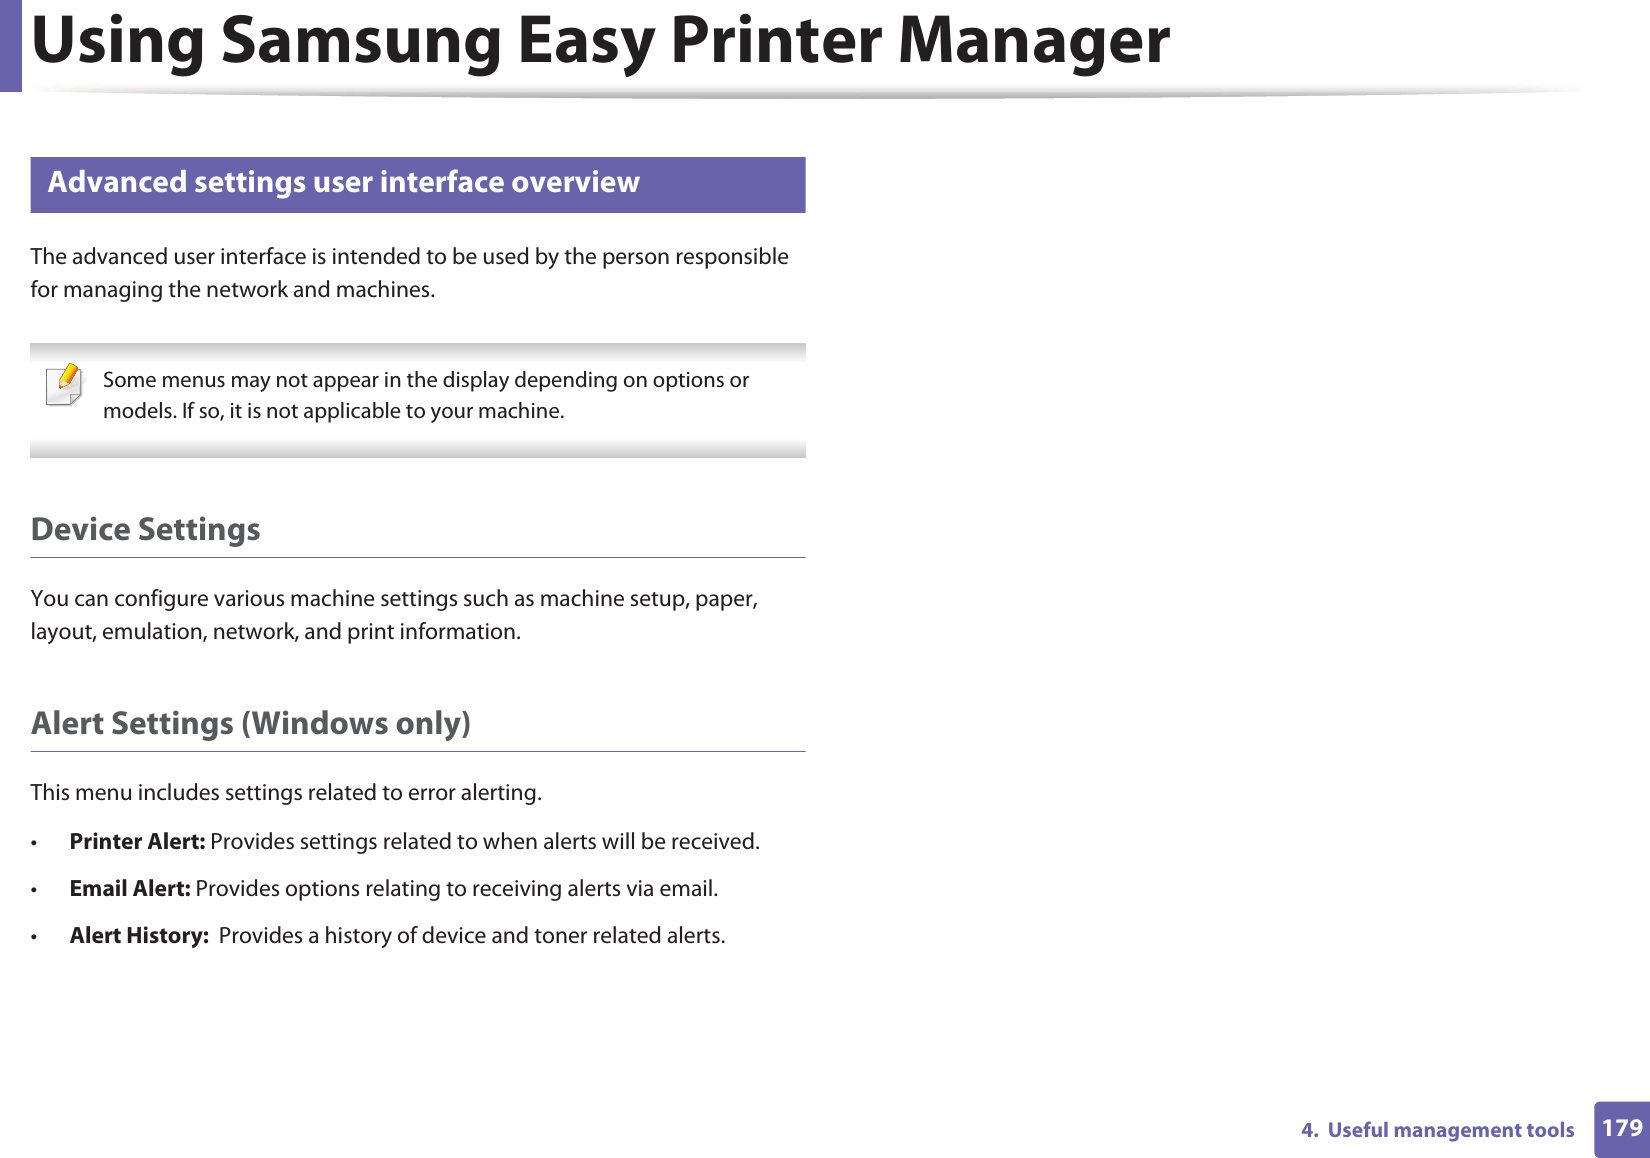 Using Samsung Easy Printer Manager1794.  Useful management tools5 Advanced settings user interface overviewThe advanced user interface is intended to be used by the person responsible for managing the network and machines. Some menus may not appear in the display depending on options or models. If so, it is not applicable to your machine. Device SettingsYou can configure various machine settings such as machine setup, paper, layout, emulation, network, and print information.Alert Settings (Windows only)This menu includes settings related to error alerting. •Printer Alert: Provides settings related to when alerts will be received.•Email Alert: Provides options relating to receiving alerts via email.•Alert History:  Provides a history of device and toner related alerts.